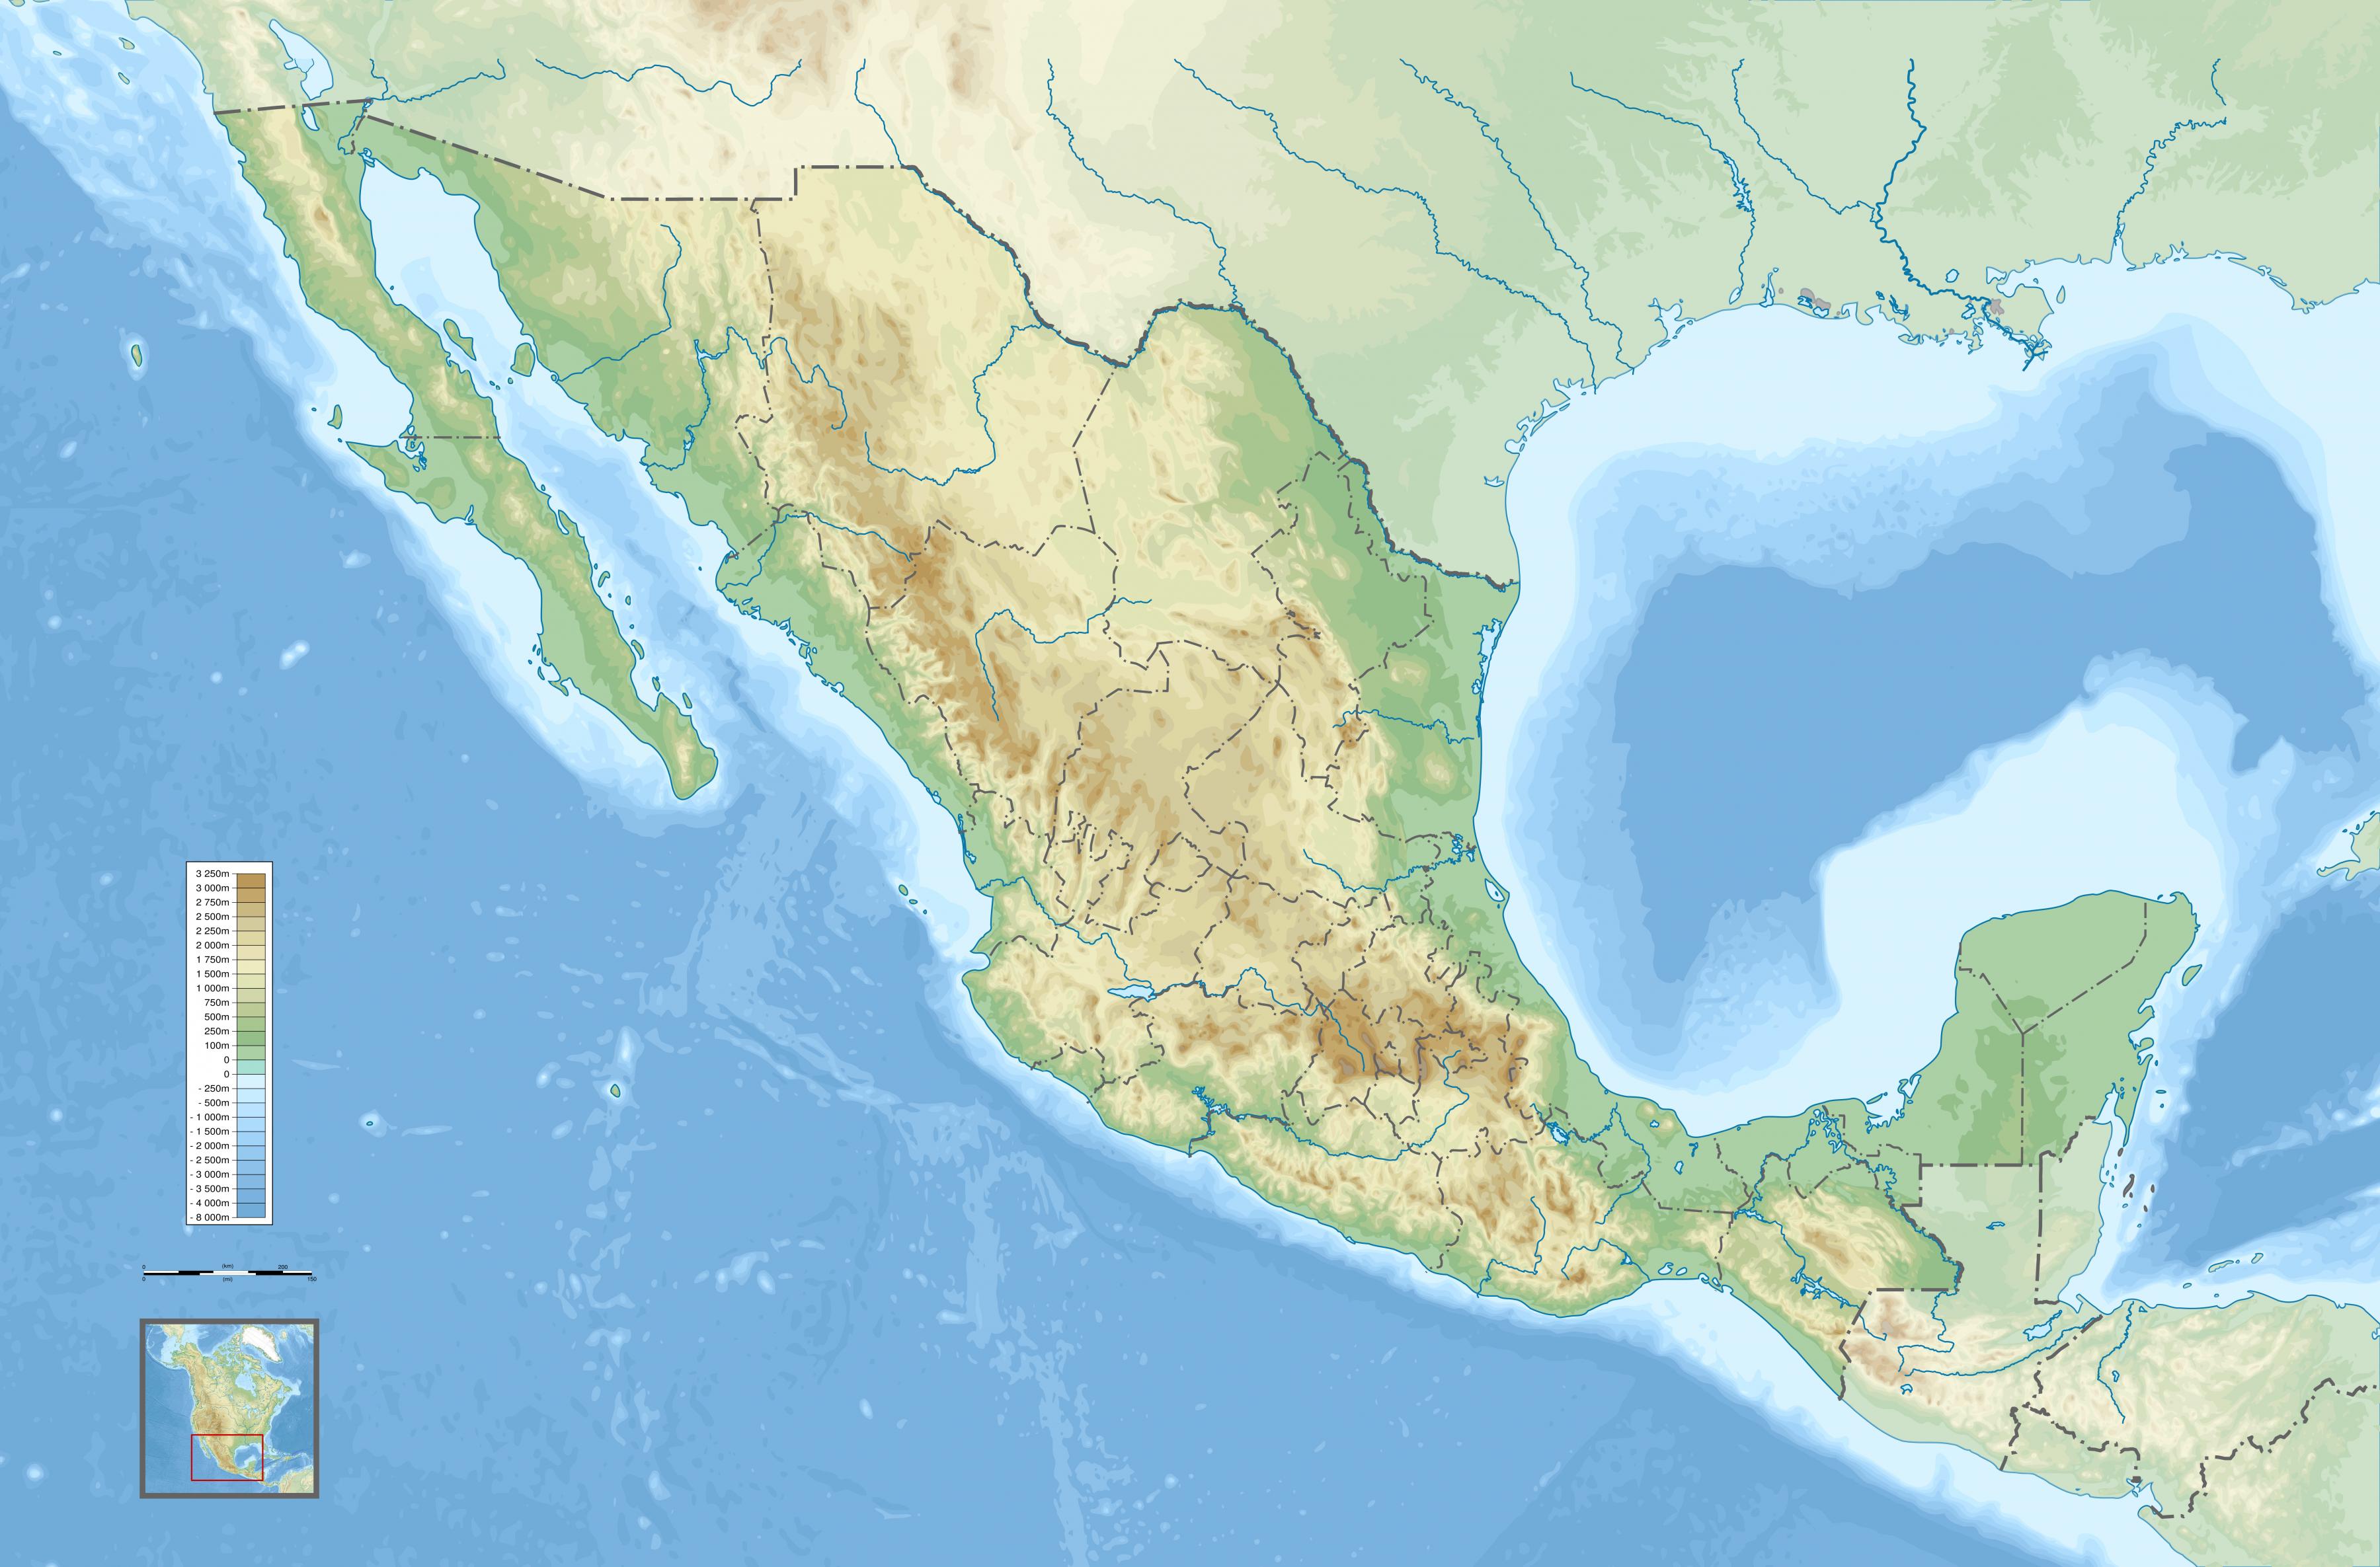 mexico case study geography